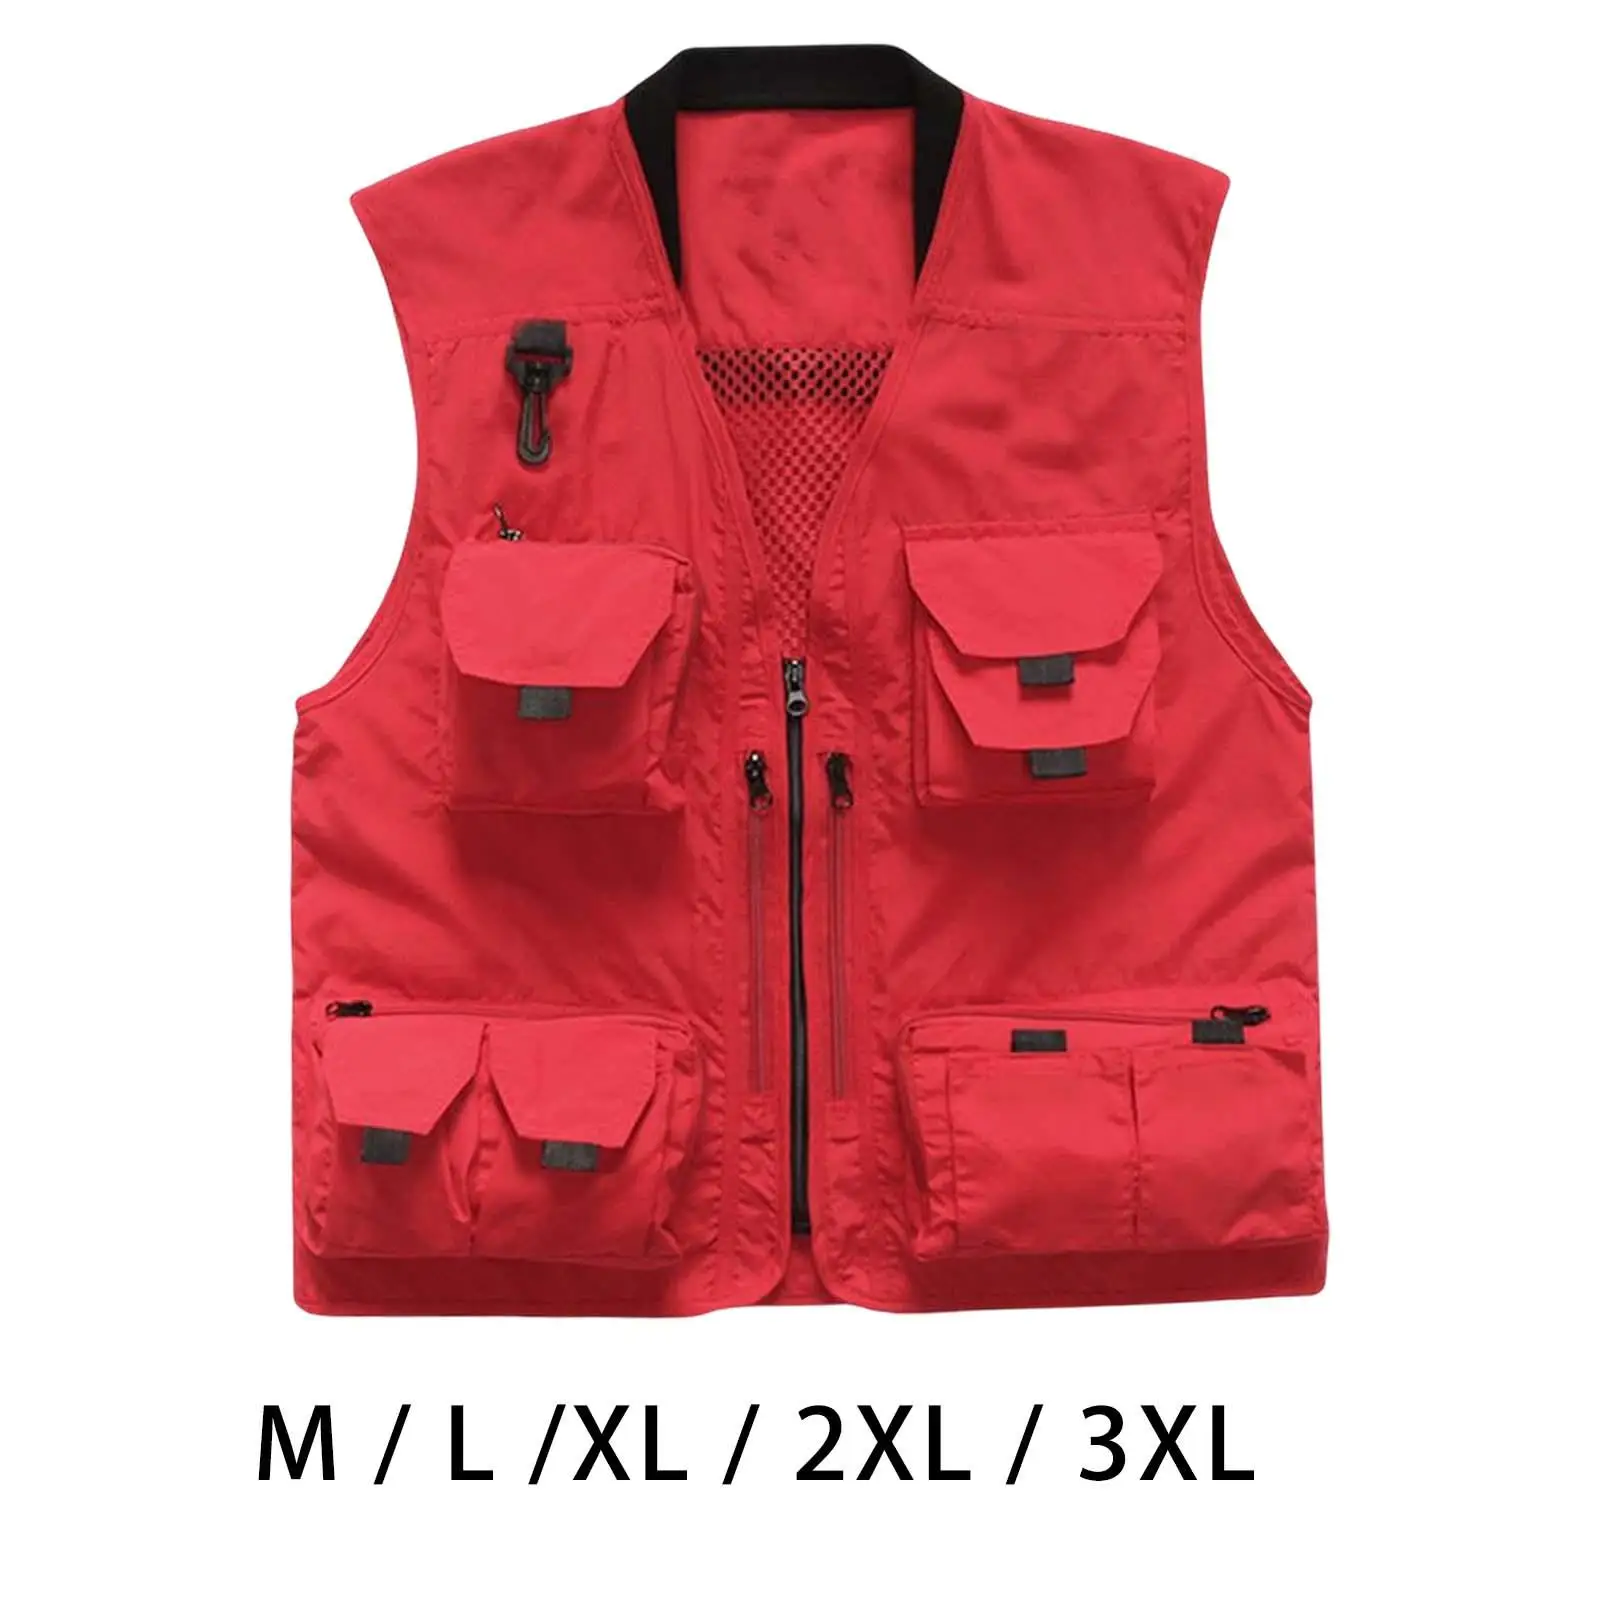 Mens Fishing Vest Clothing with Pockets Mesh Zipper Lightweight Waistcoat Modern Jacket for Outdoor Activities Hiking Travel